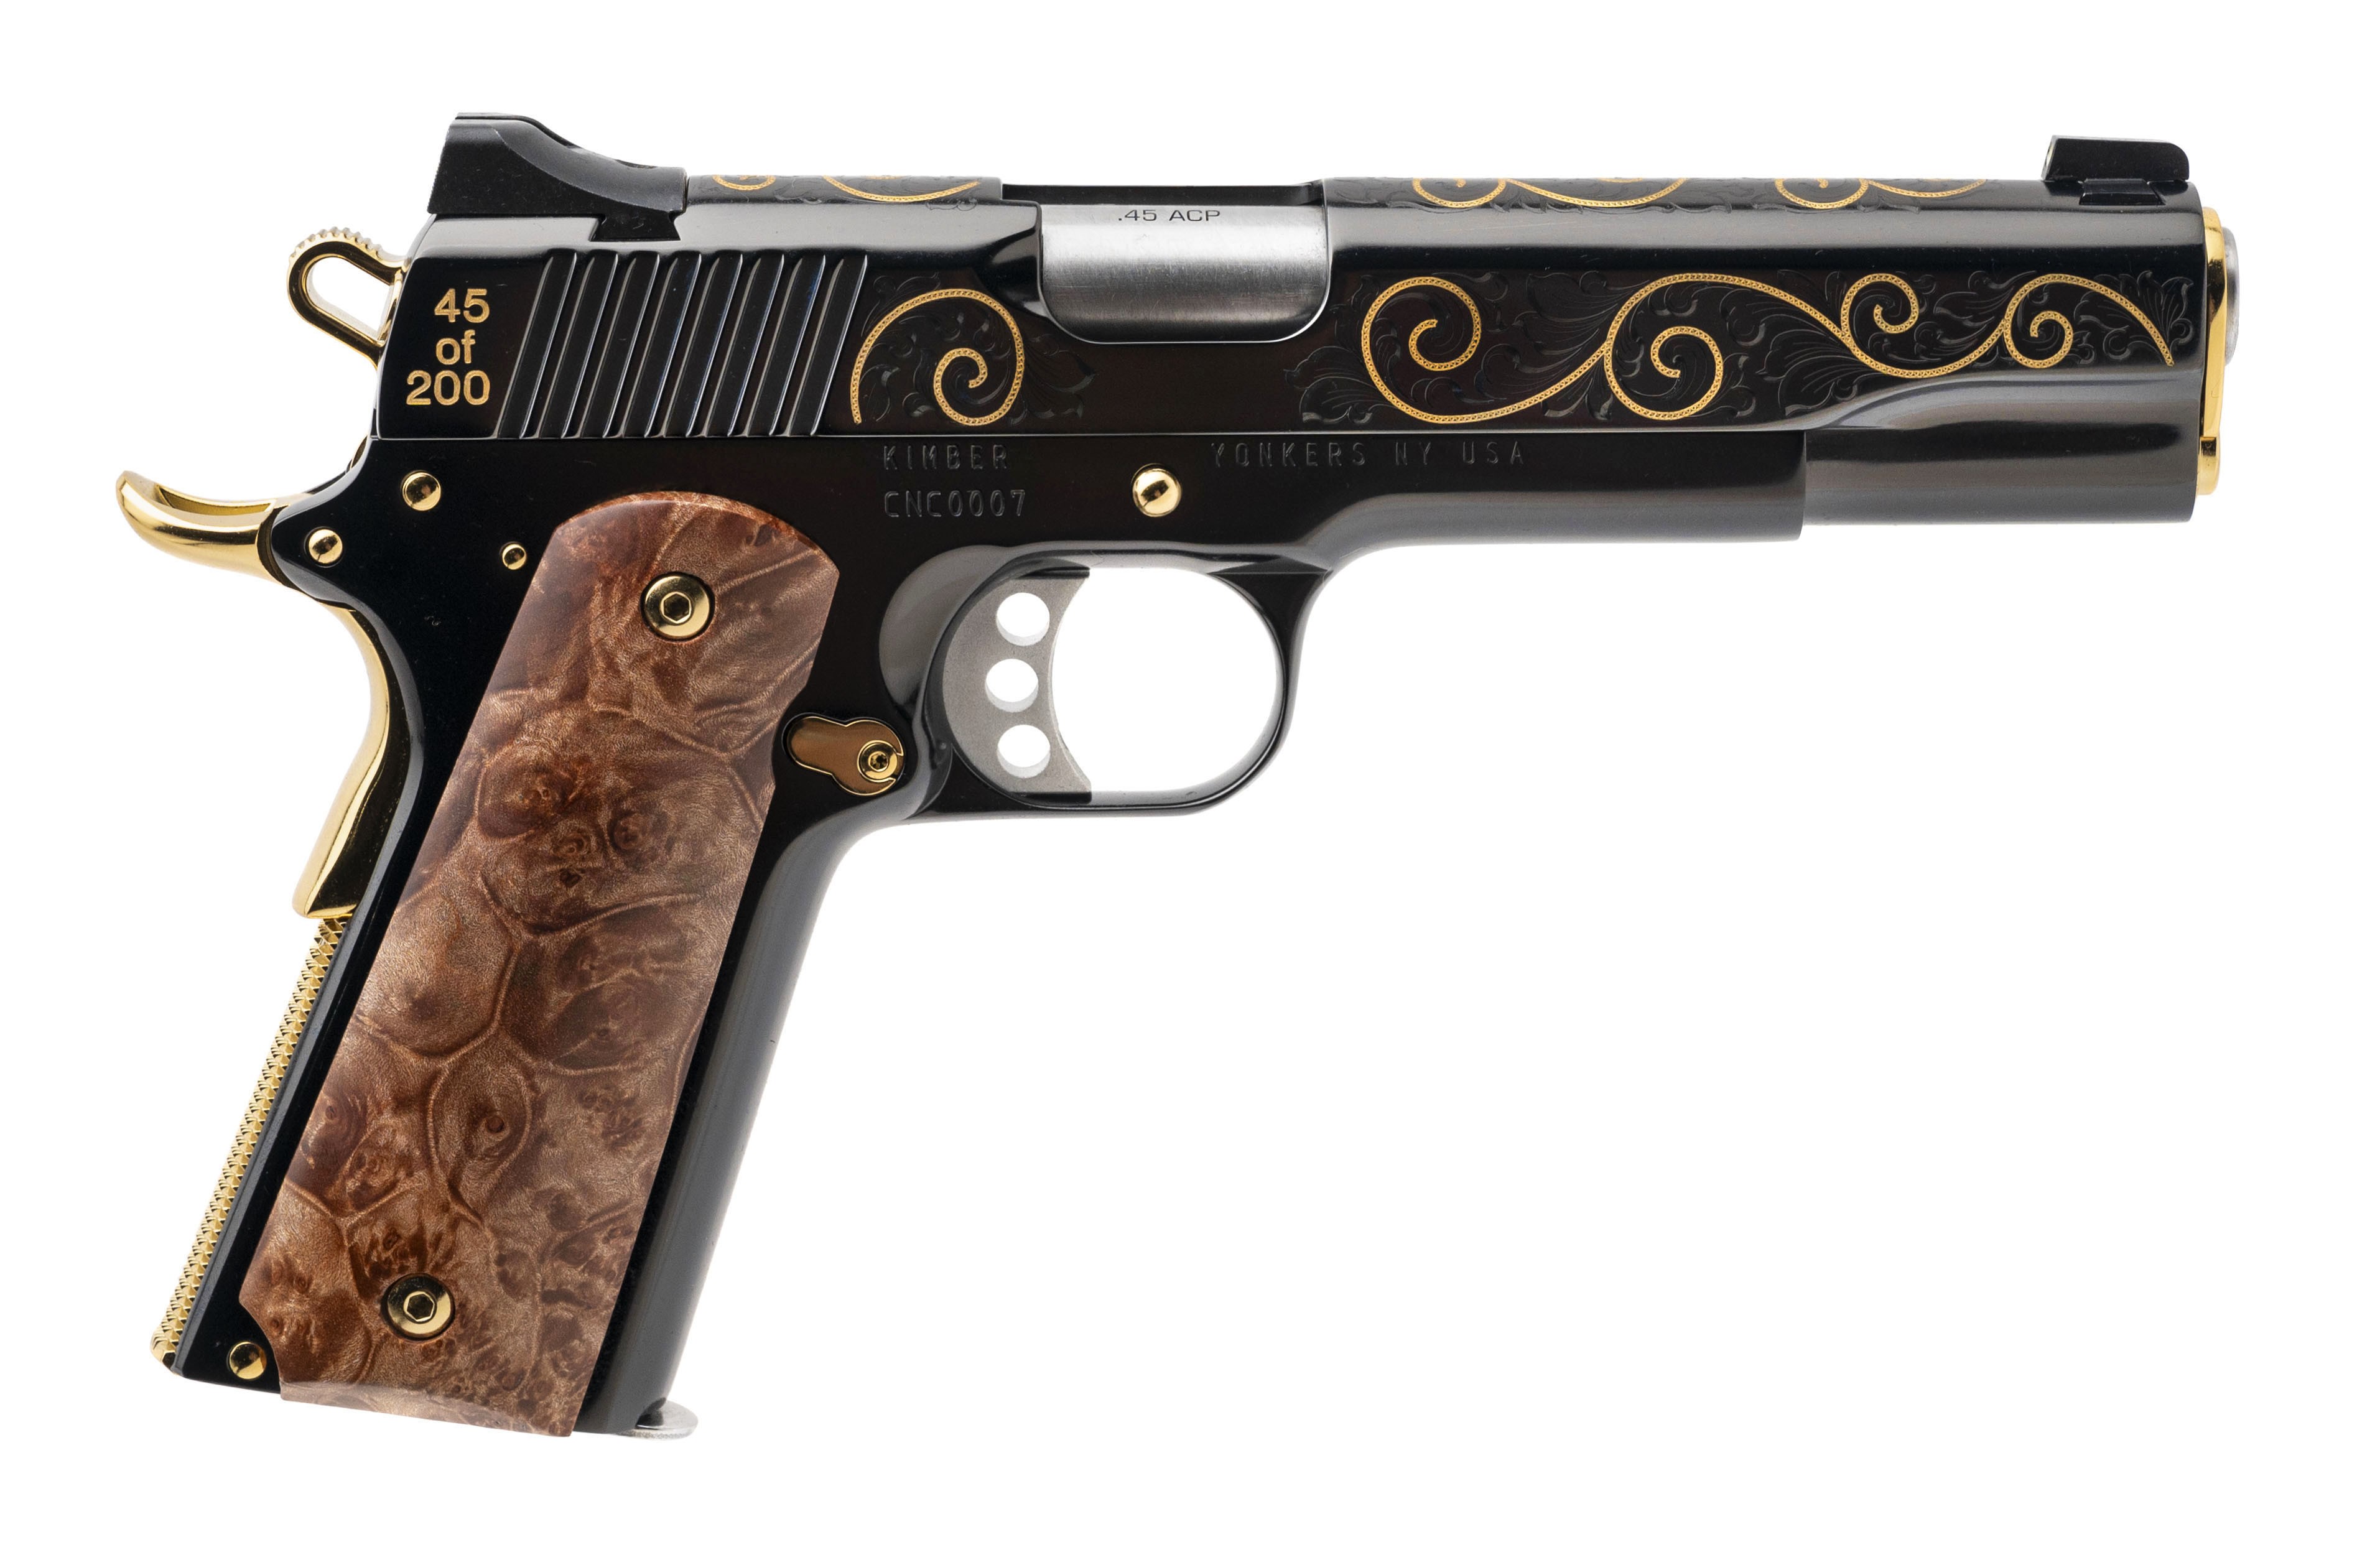 (SN: CNC0007) Custom & Collectable Kimber K1911 Black Deluxe 